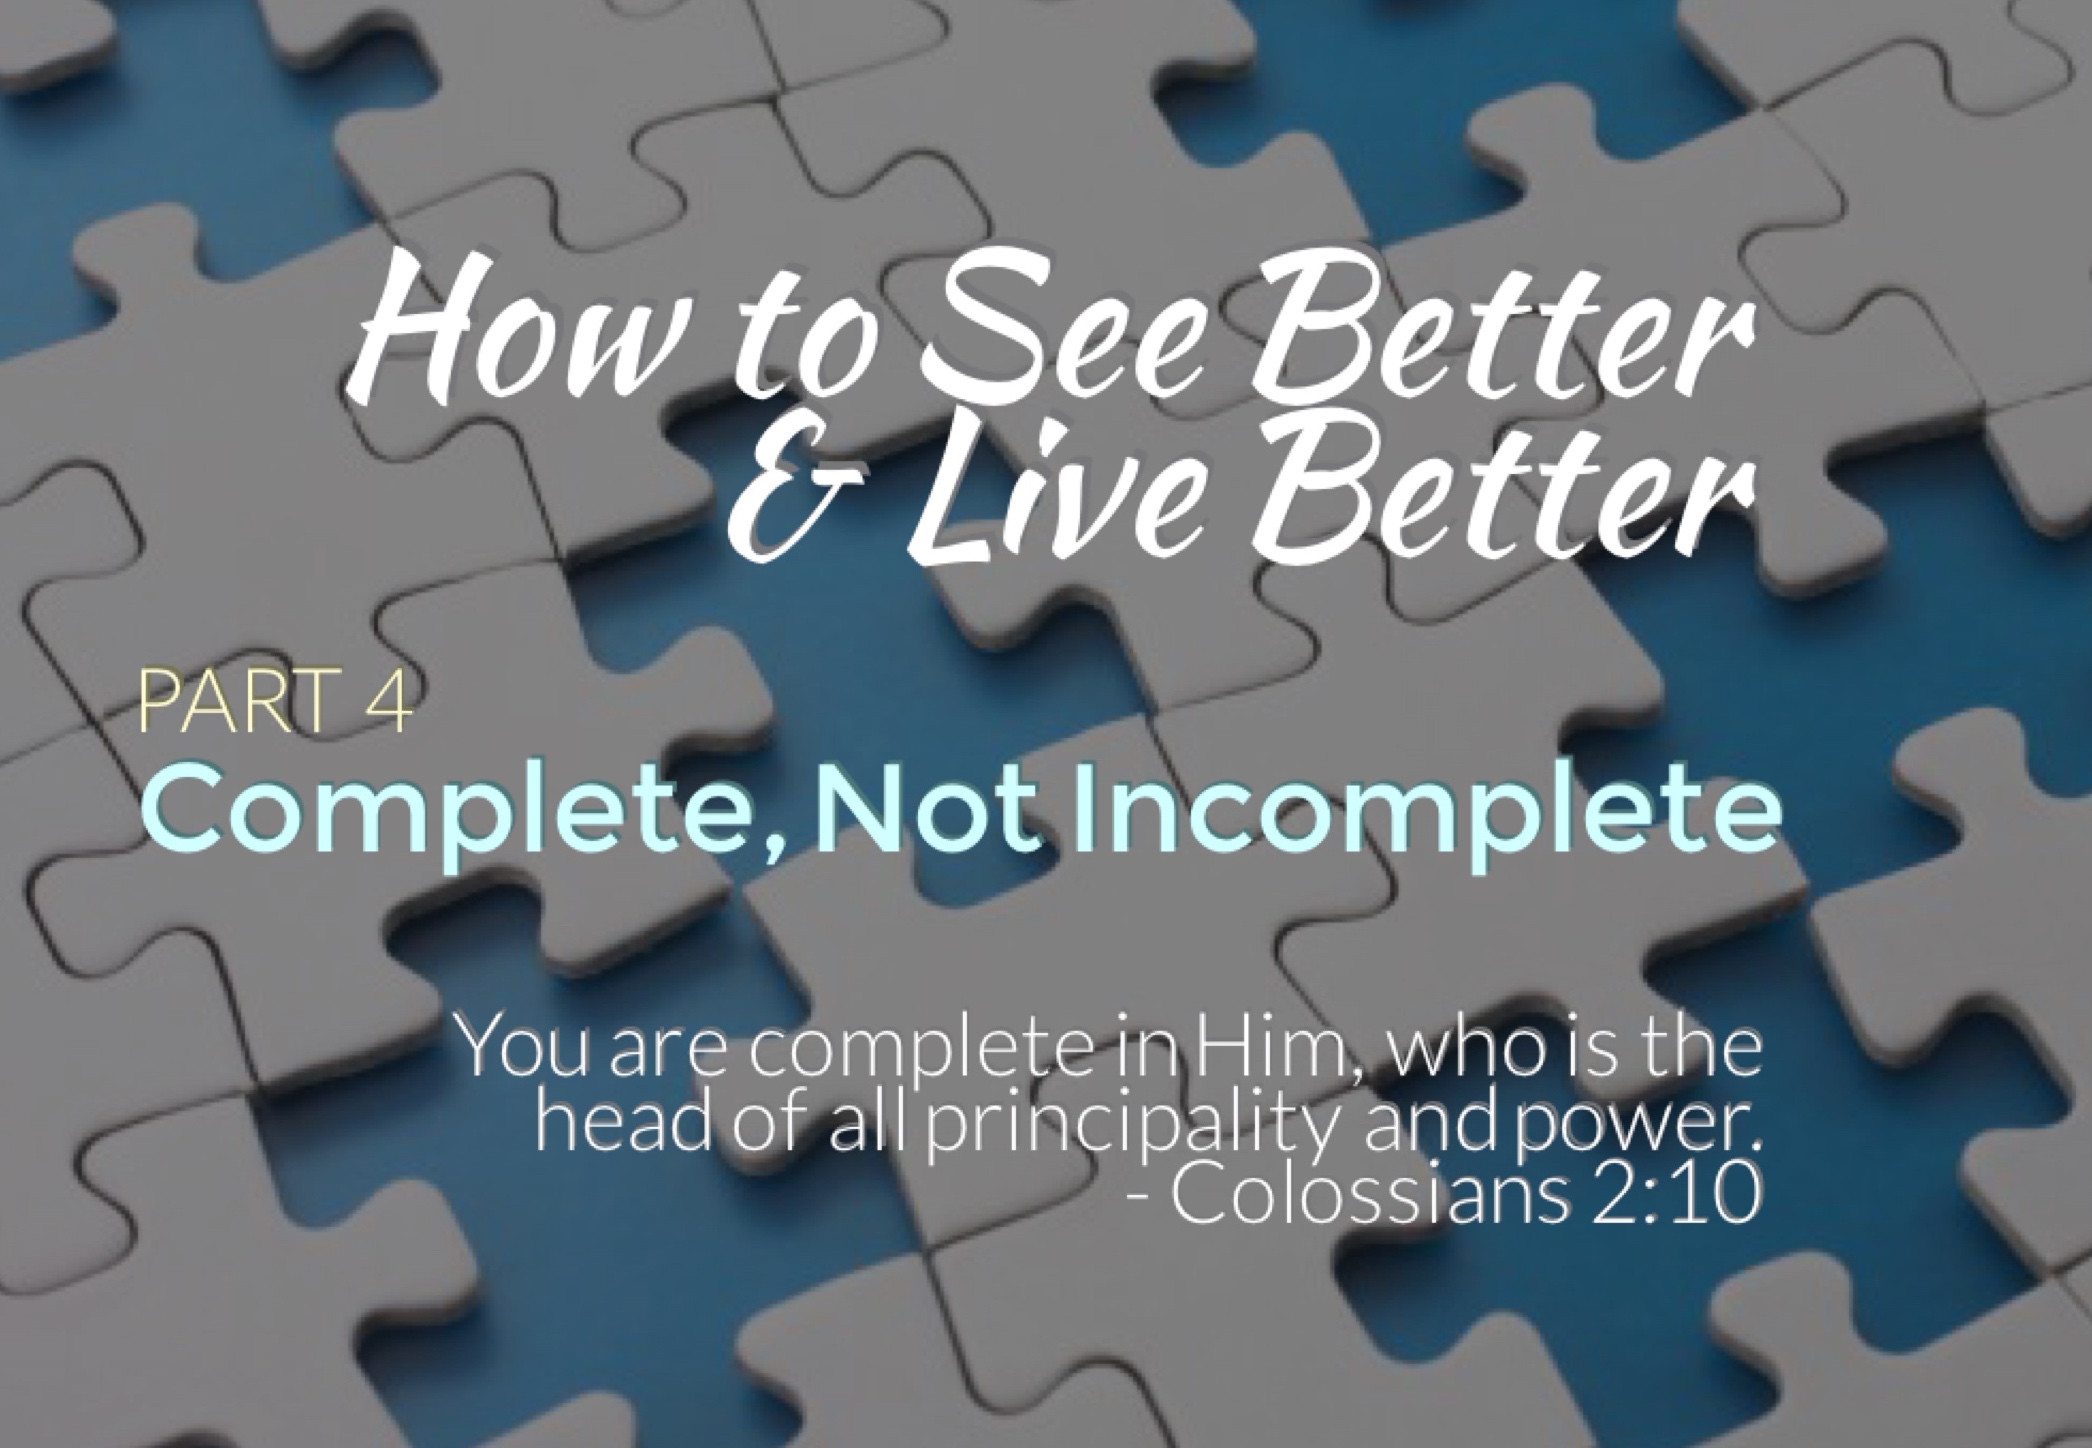 ”How to See Better & Live Better” - Pt. 4 ”Complete, Not Incomplete”